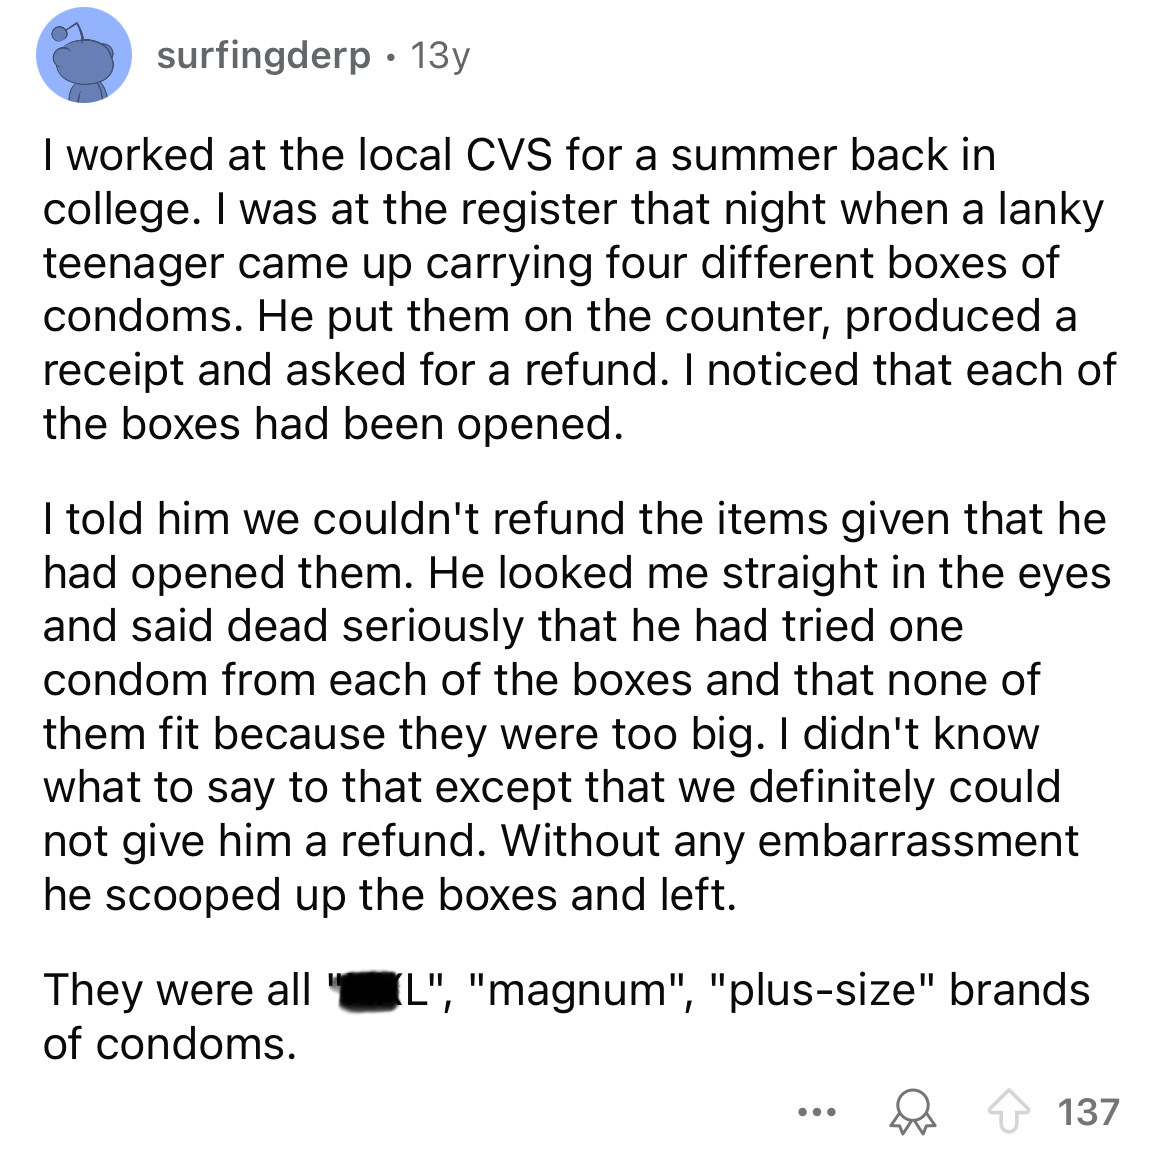 document - surfingderp. 13y I worked at the local Cvs for a summer back in college. I was at the register that night when a lanky teenager came up carrying four different boxes of condoms. He put them on the counter, produced a receipt and asked for a ref